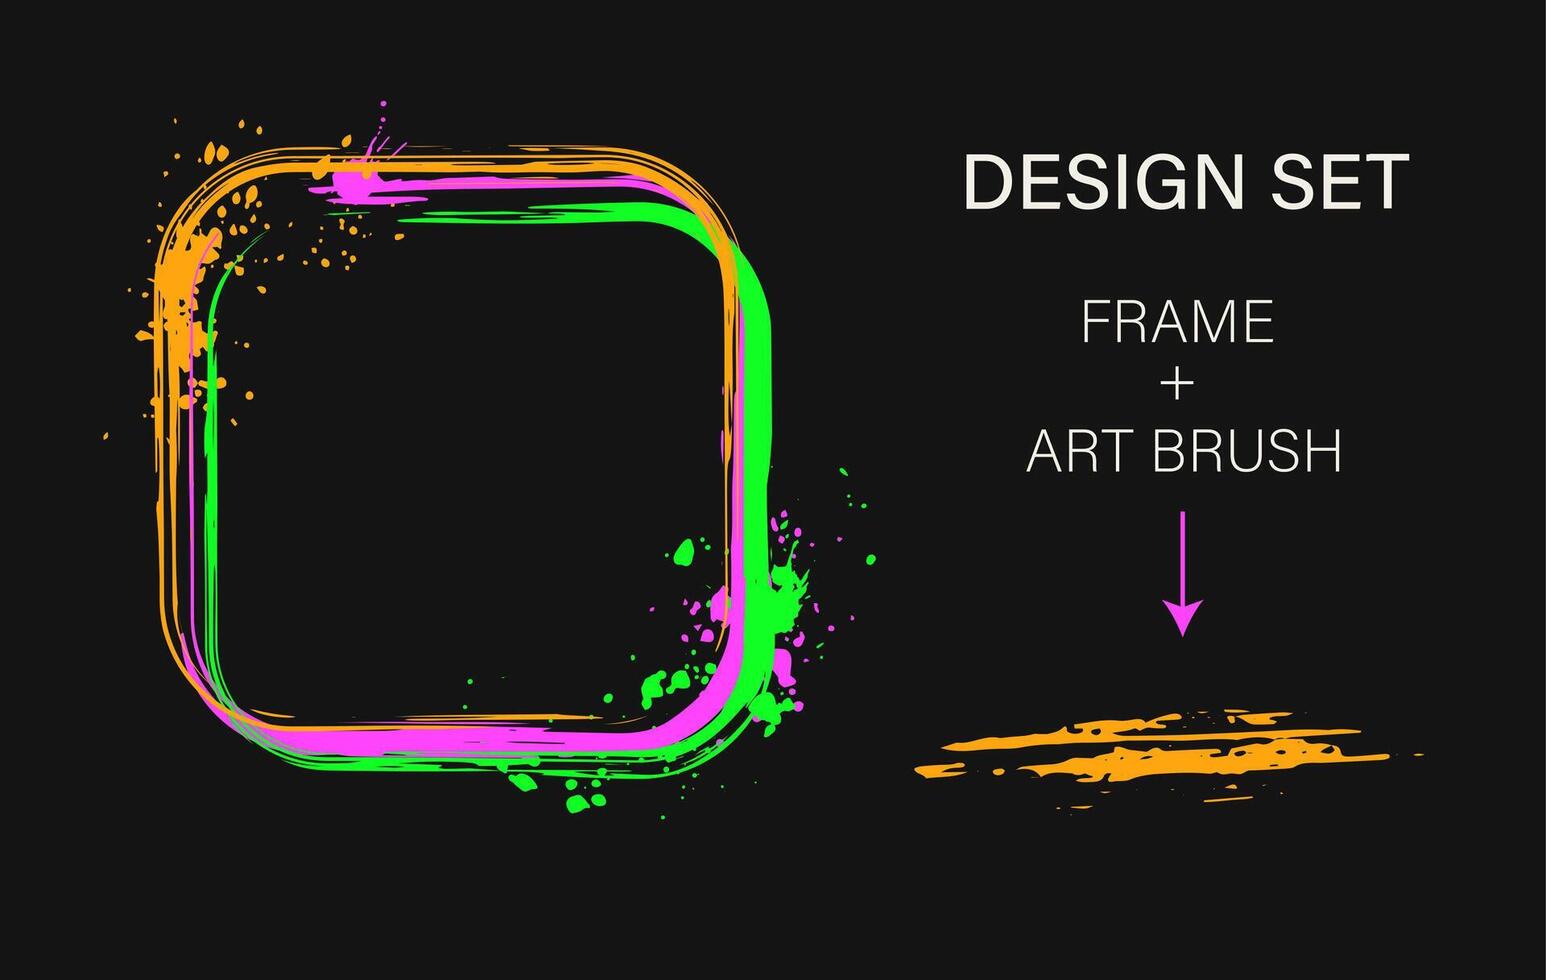 Set of design elements, square frame, grunge art brush. Geometric shape with copy space, paint brush strokes, spattered paint of neon bright colors. Virtual abstract clip art vector